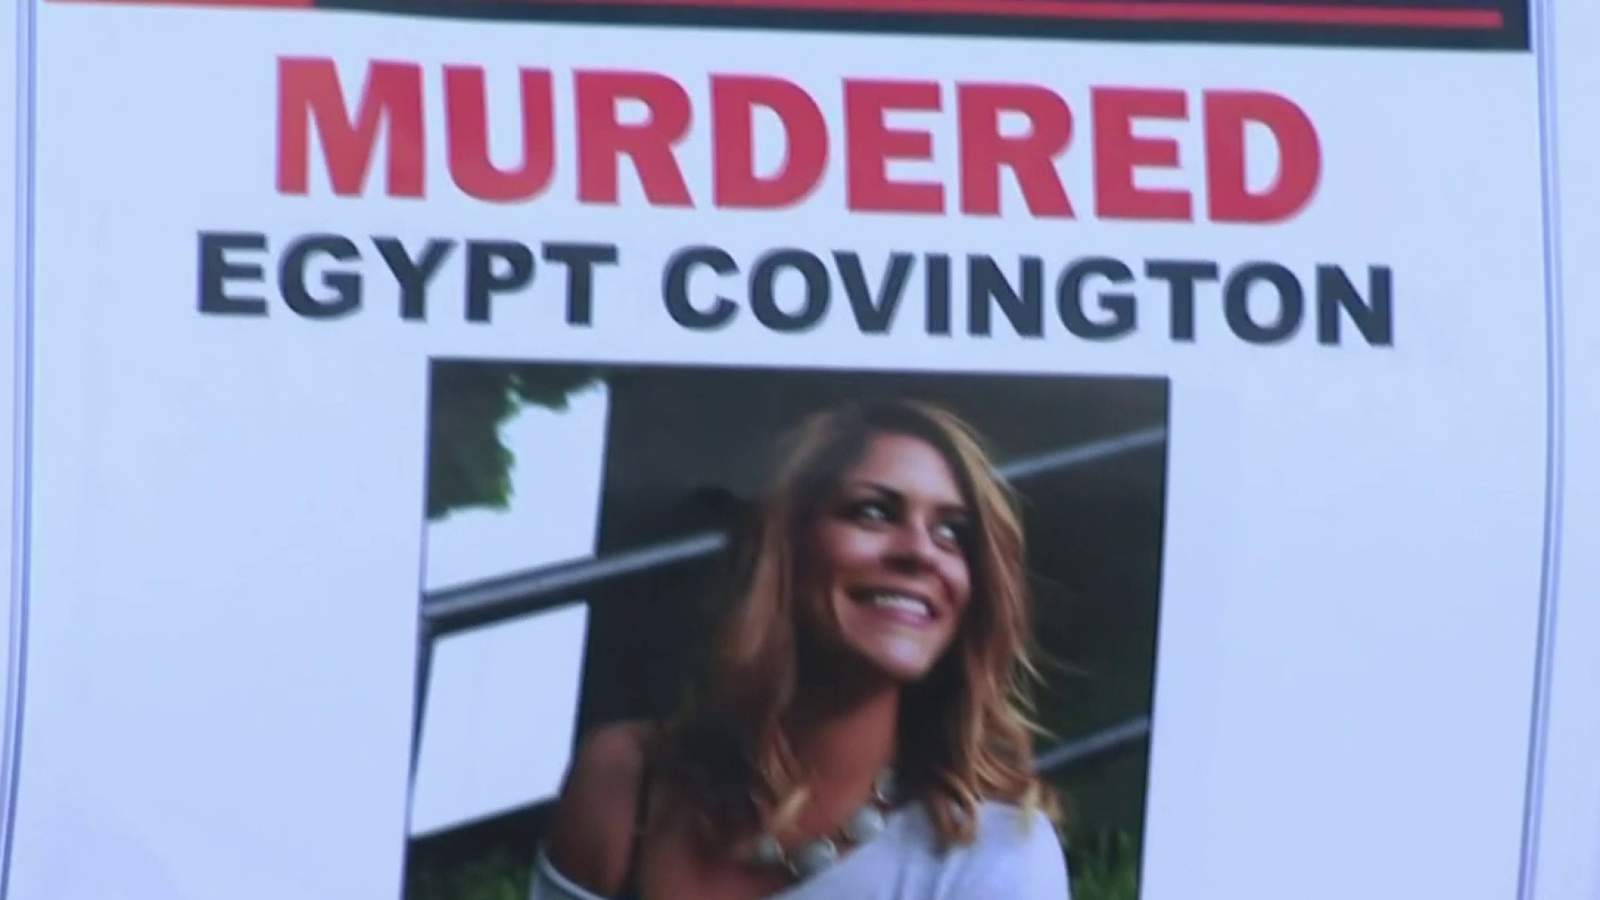 $25,000 reward offered for tips leading to arrest in murder of Egypt Covington